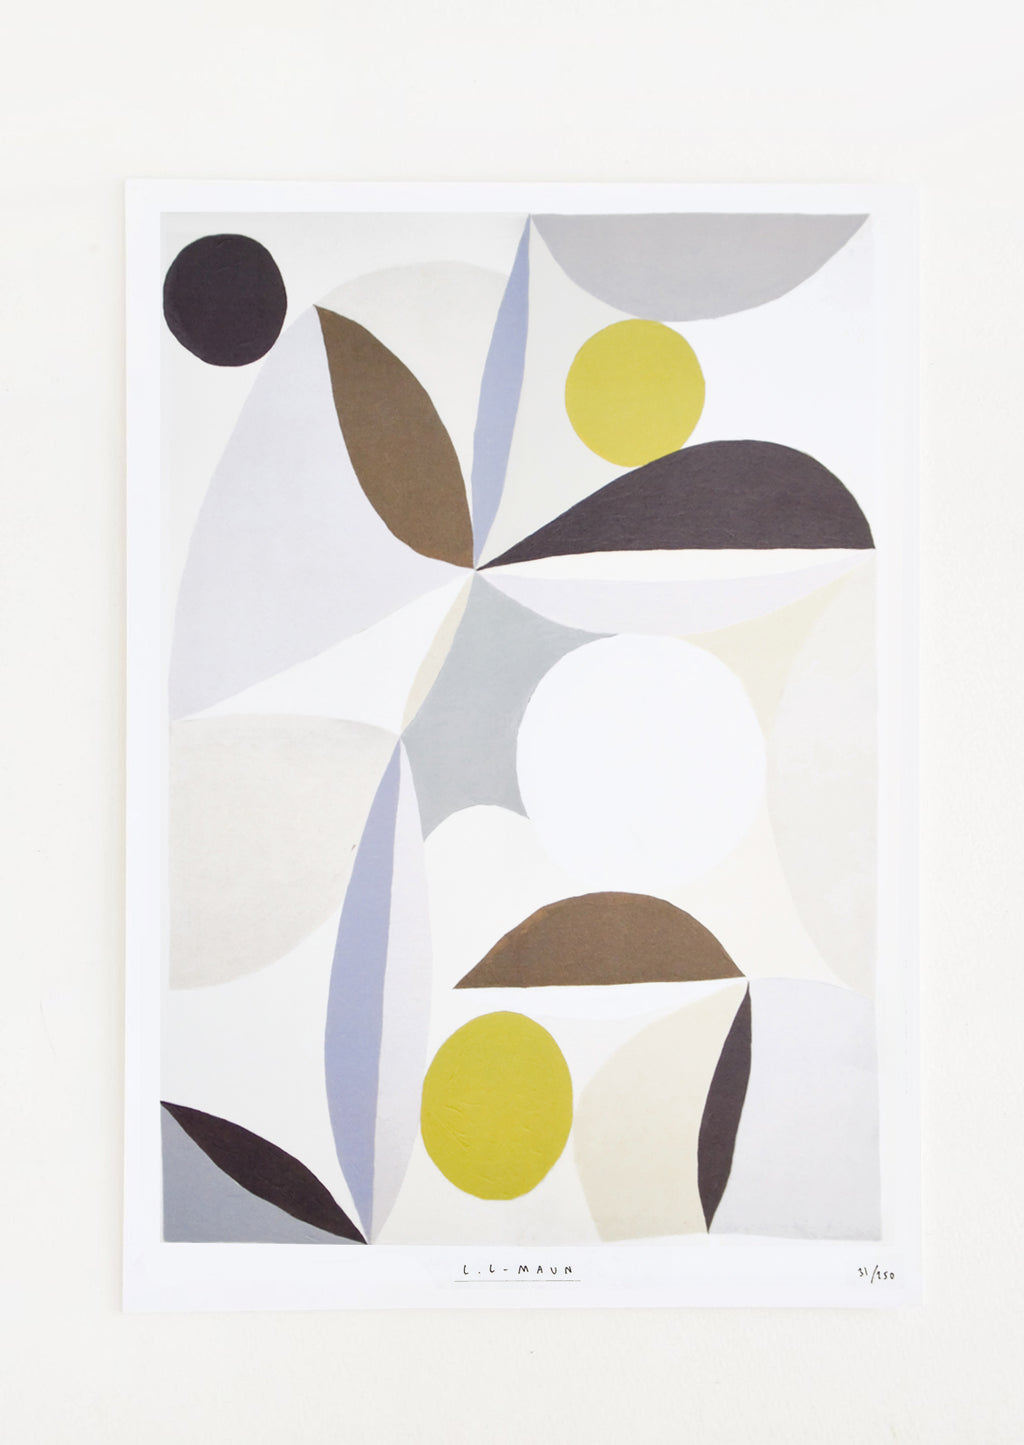 1: An abstract art print in muted shades of periwinkle, green and grey.